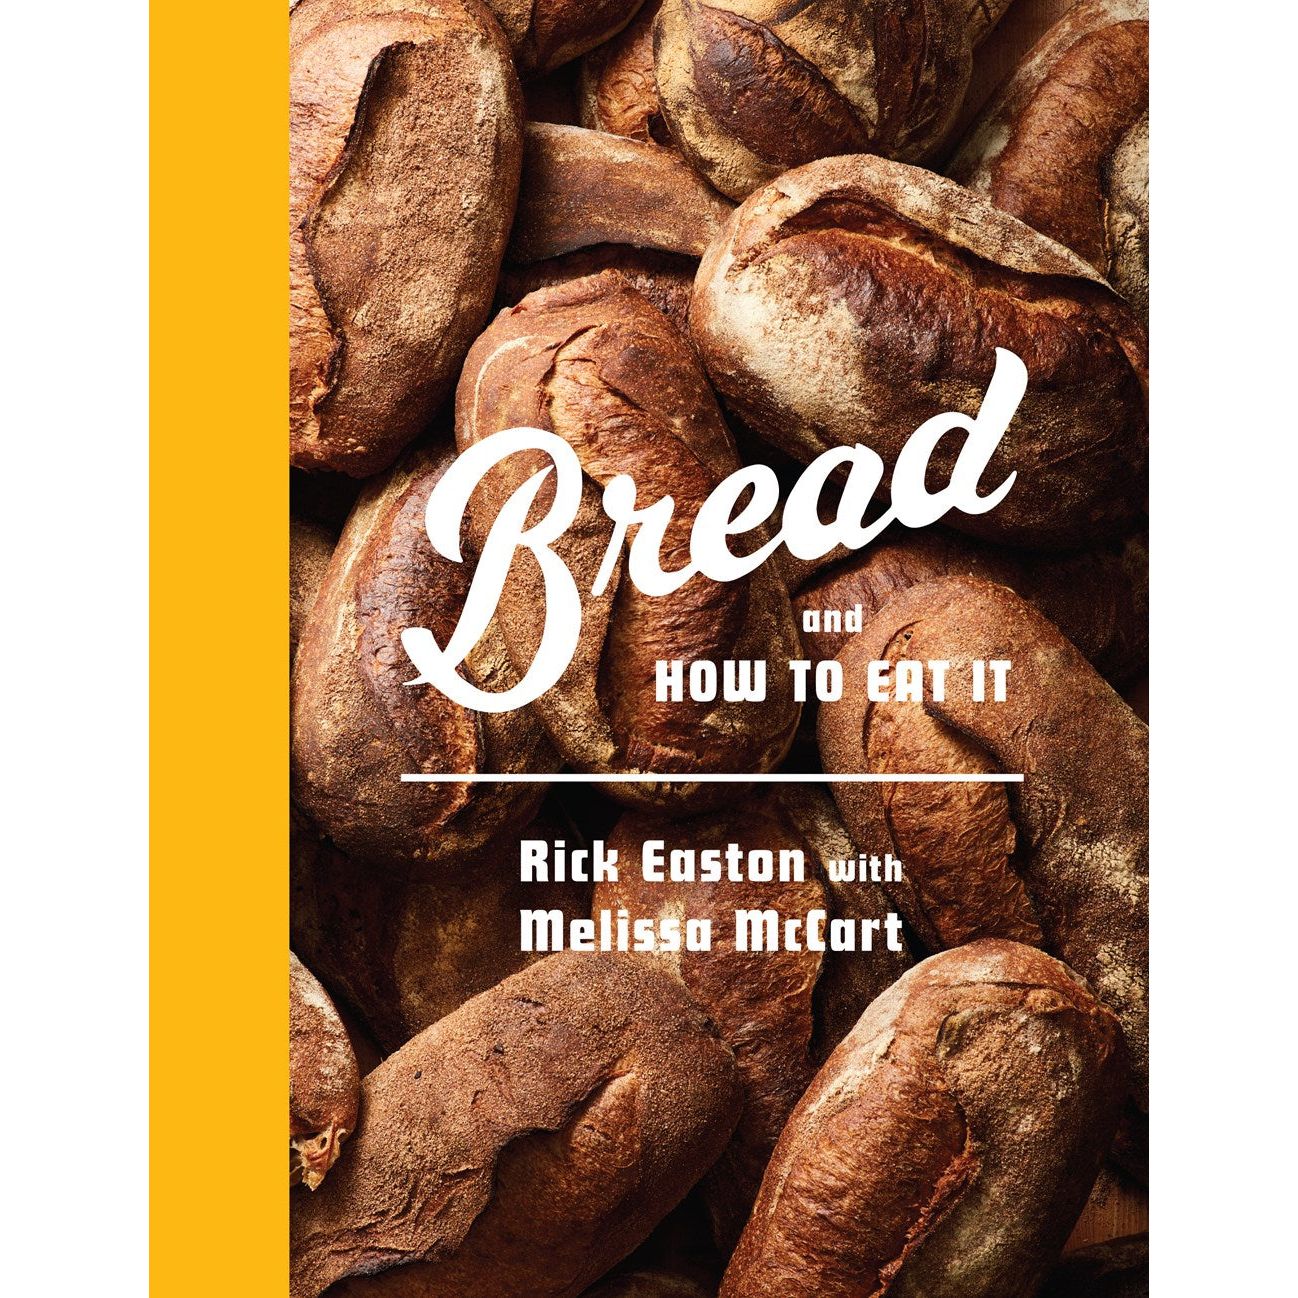 Bread and How to Eat It (Rick Easton with Melissa McCart)